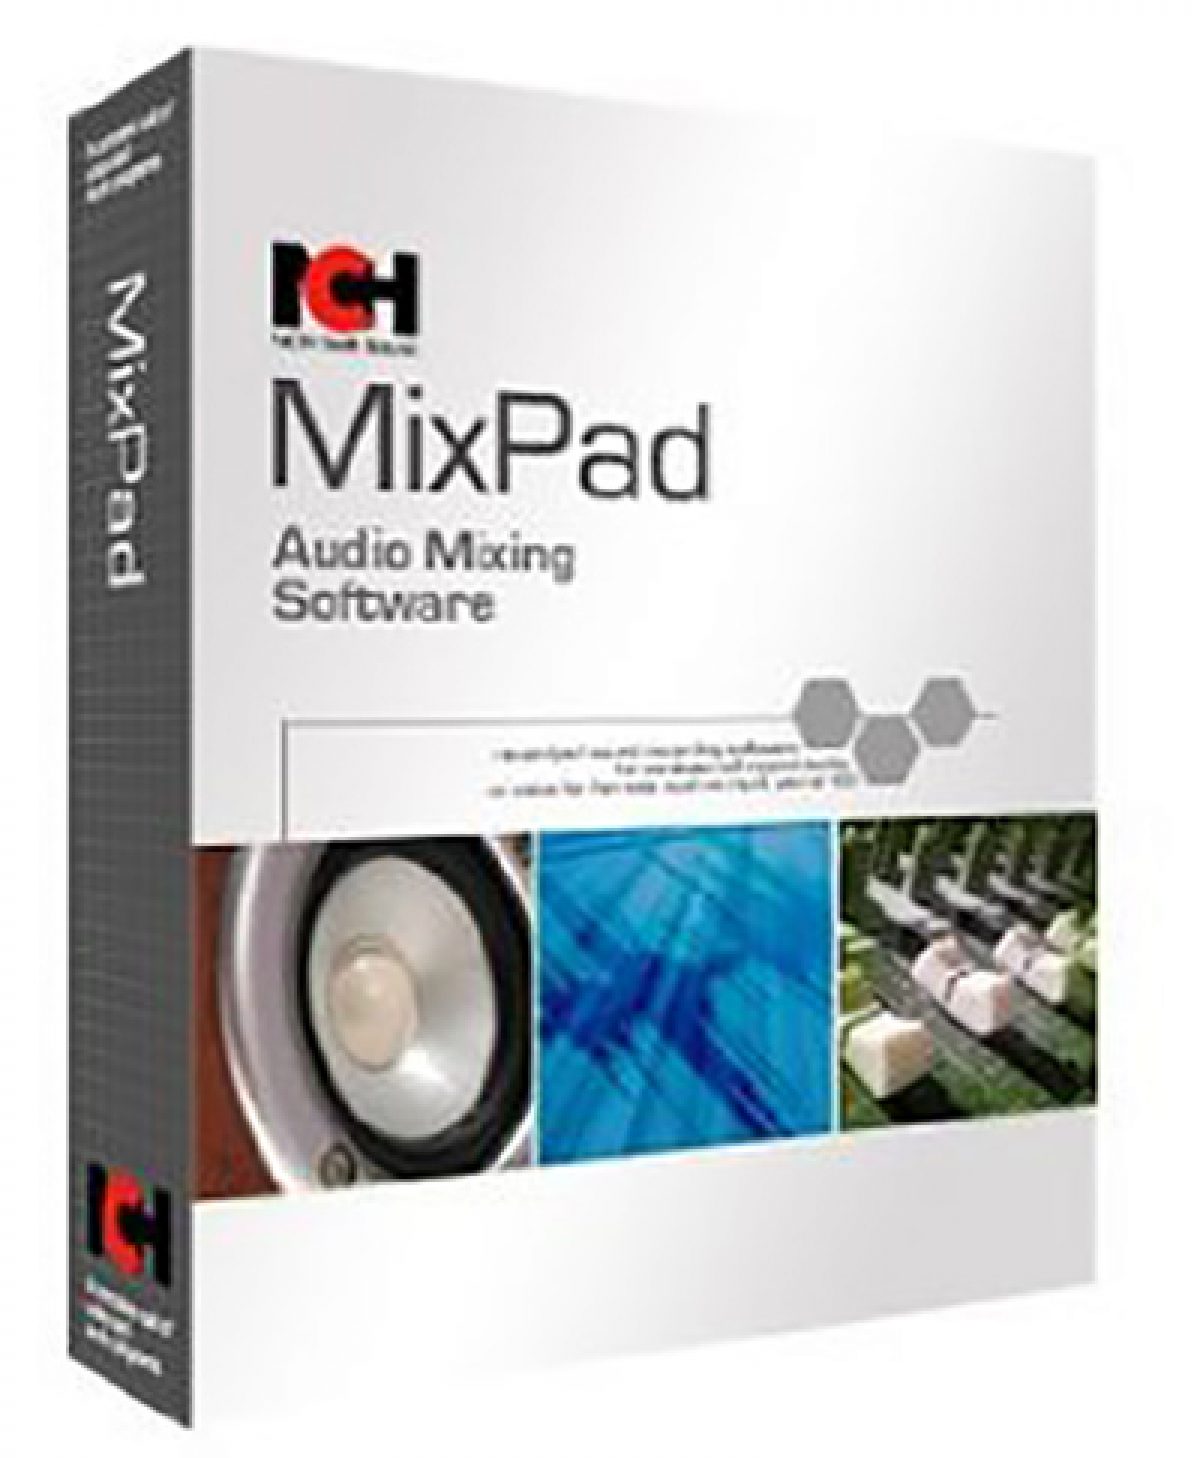 nch software free download mixpad